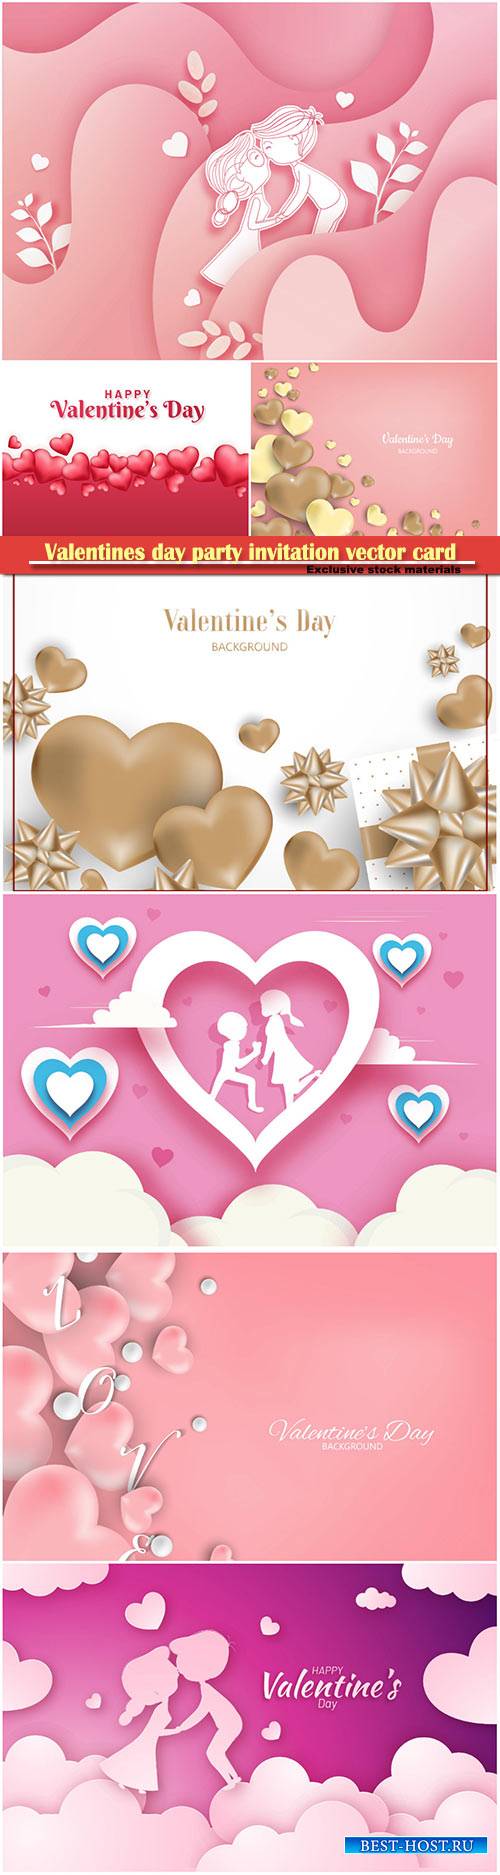 Valentines day party invitation vector card # 42